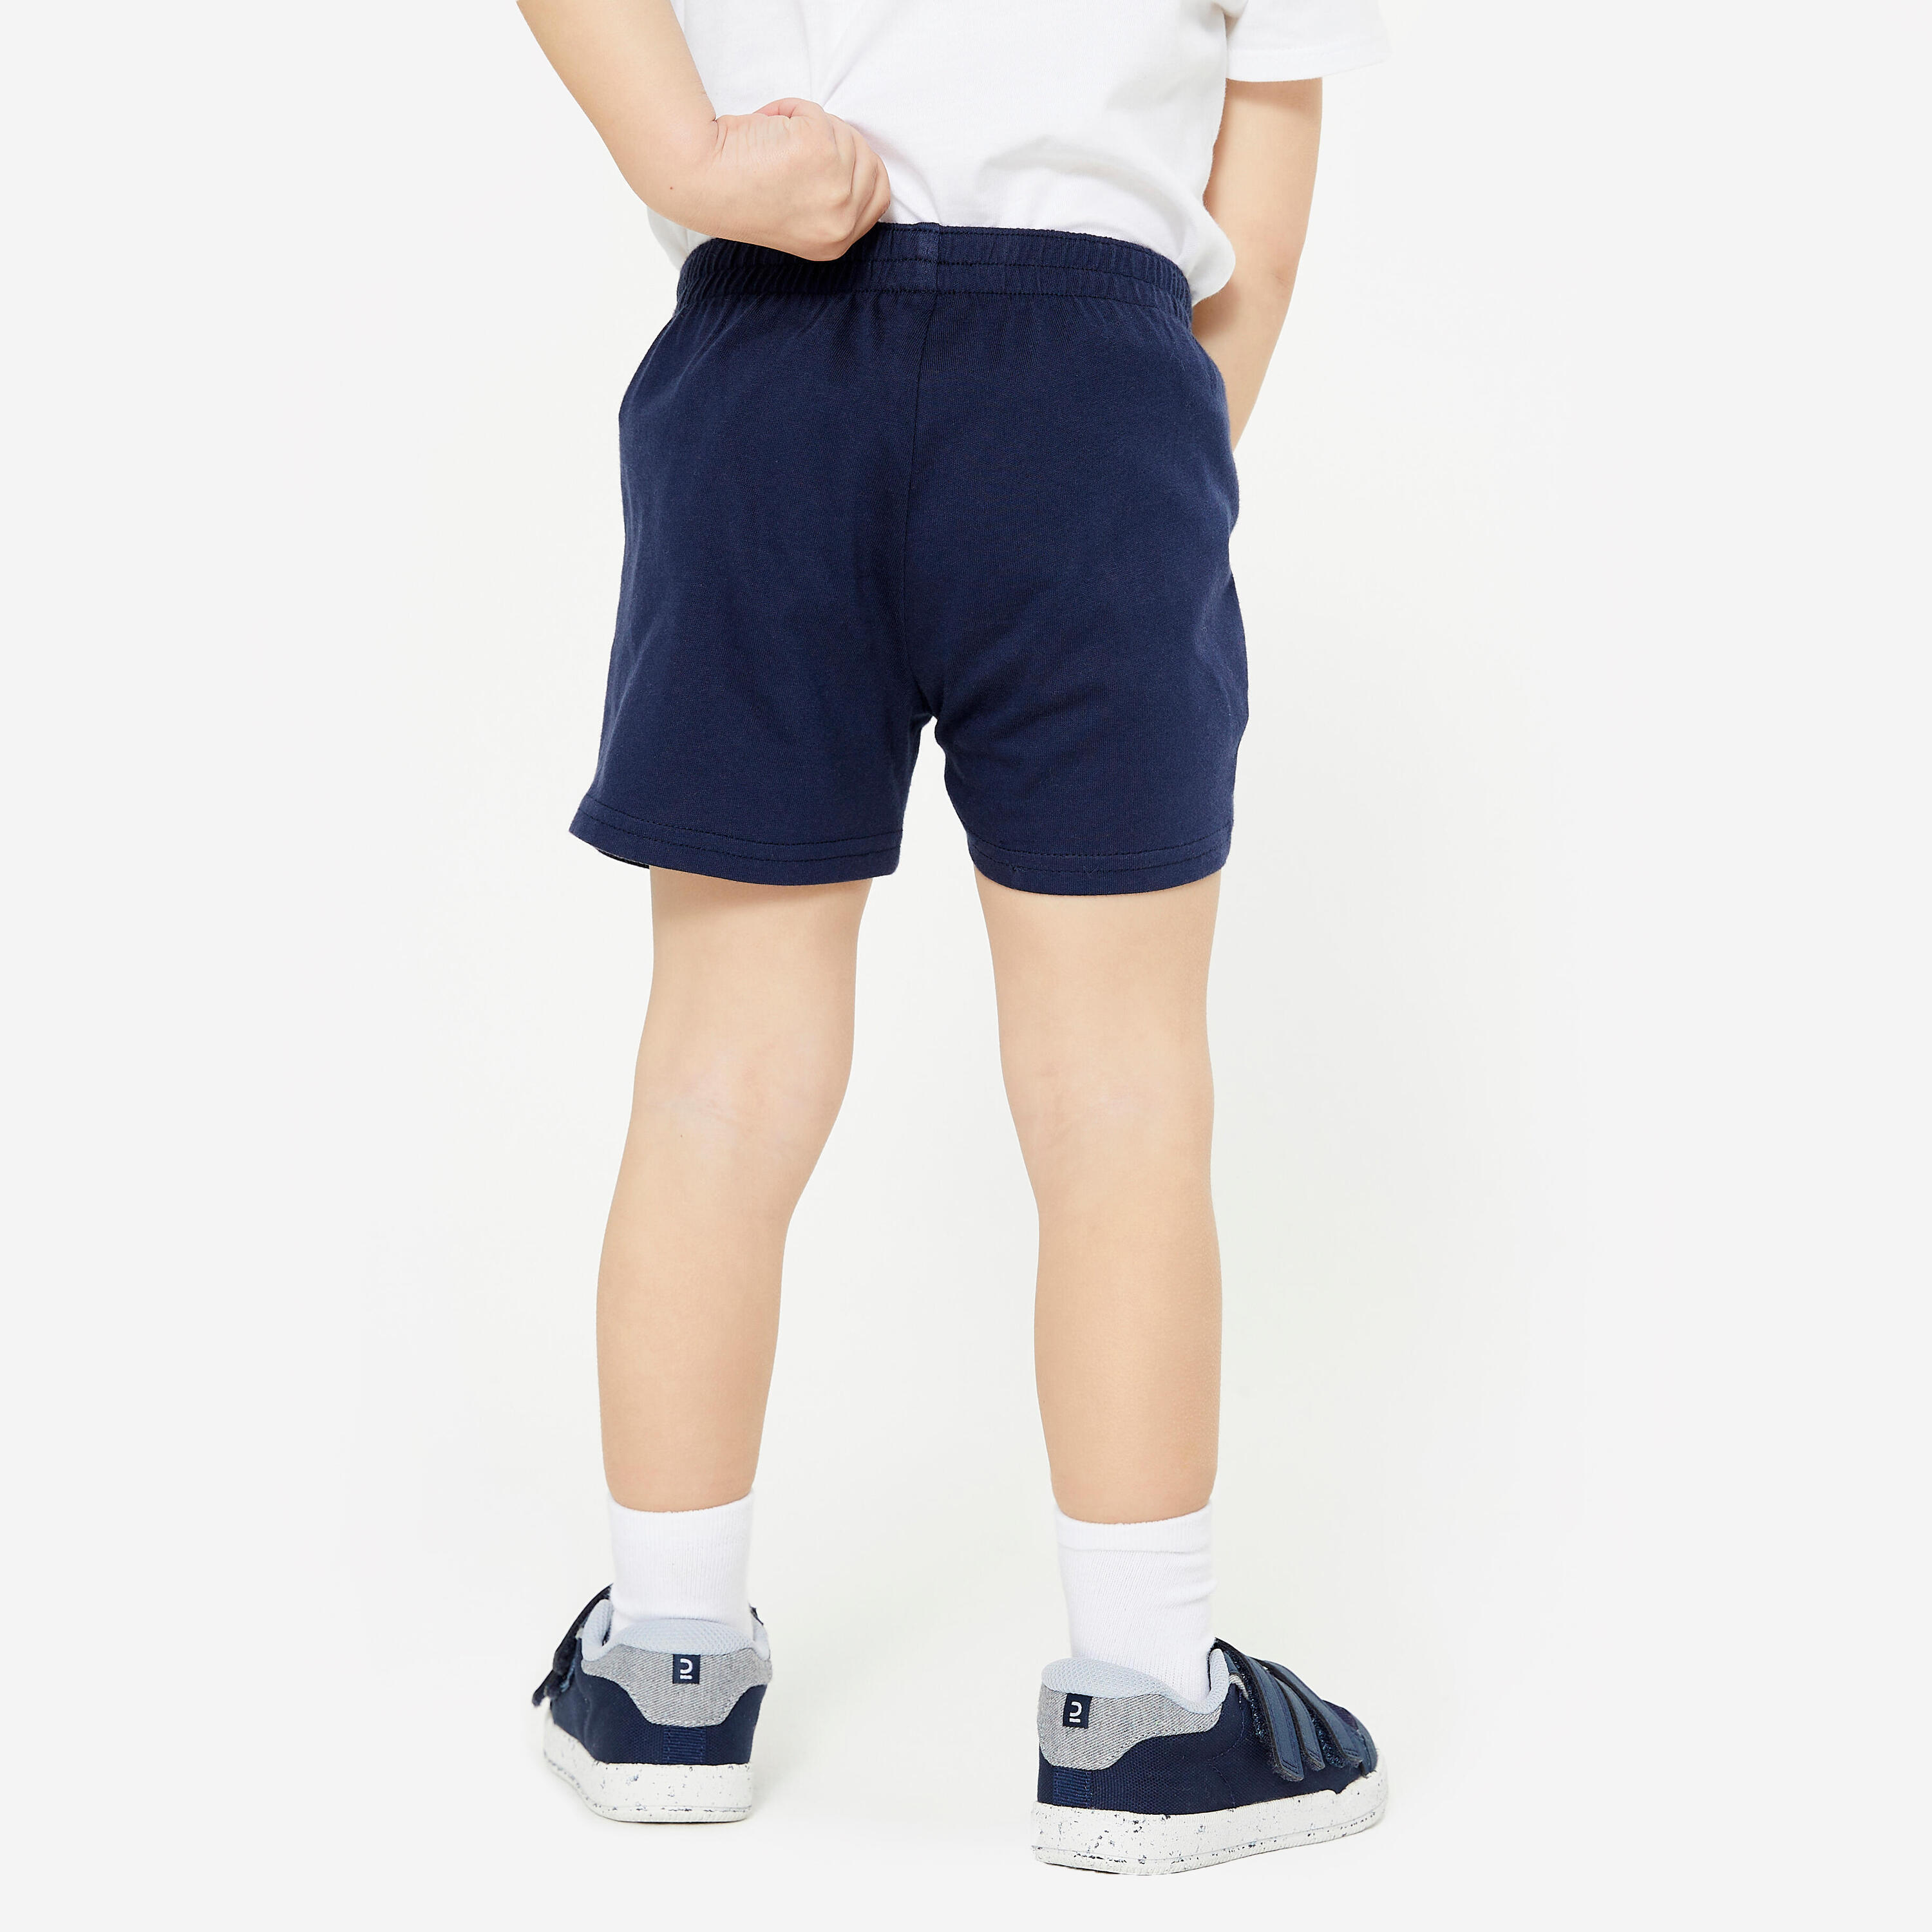 Baby Soft and Comfortable Shorts 4/5